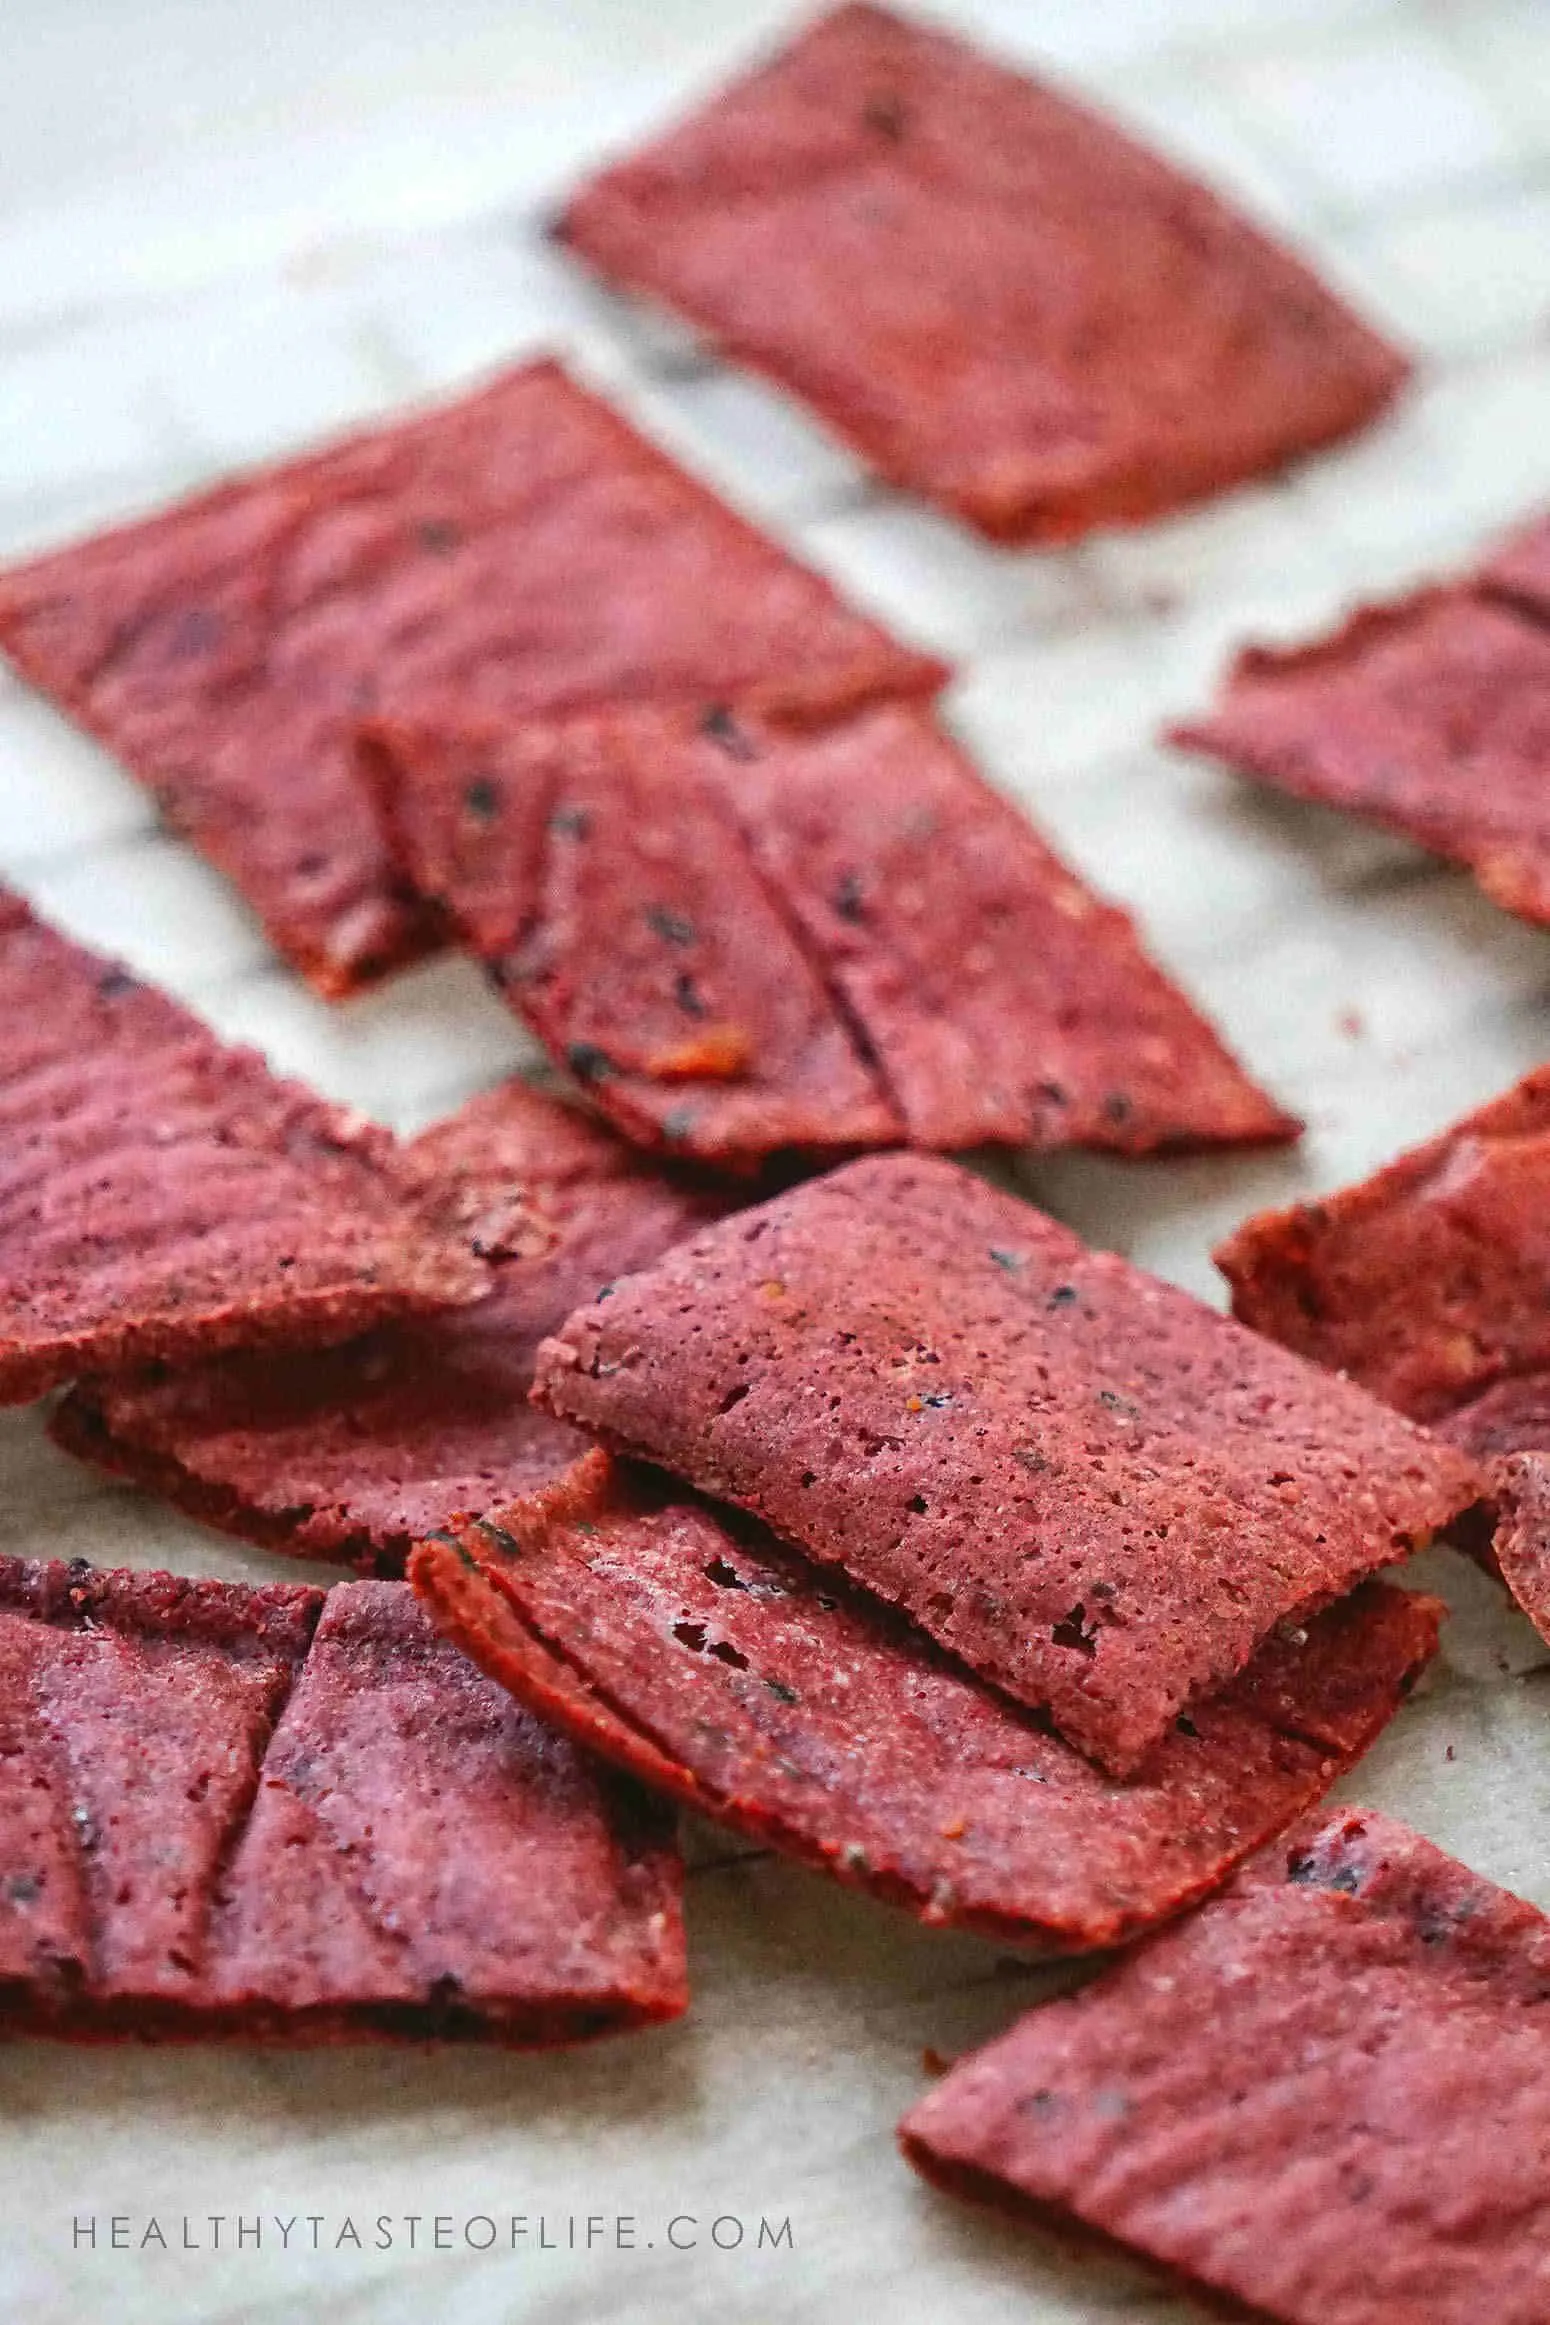 Homemade gluten free crackers with beets and seeds